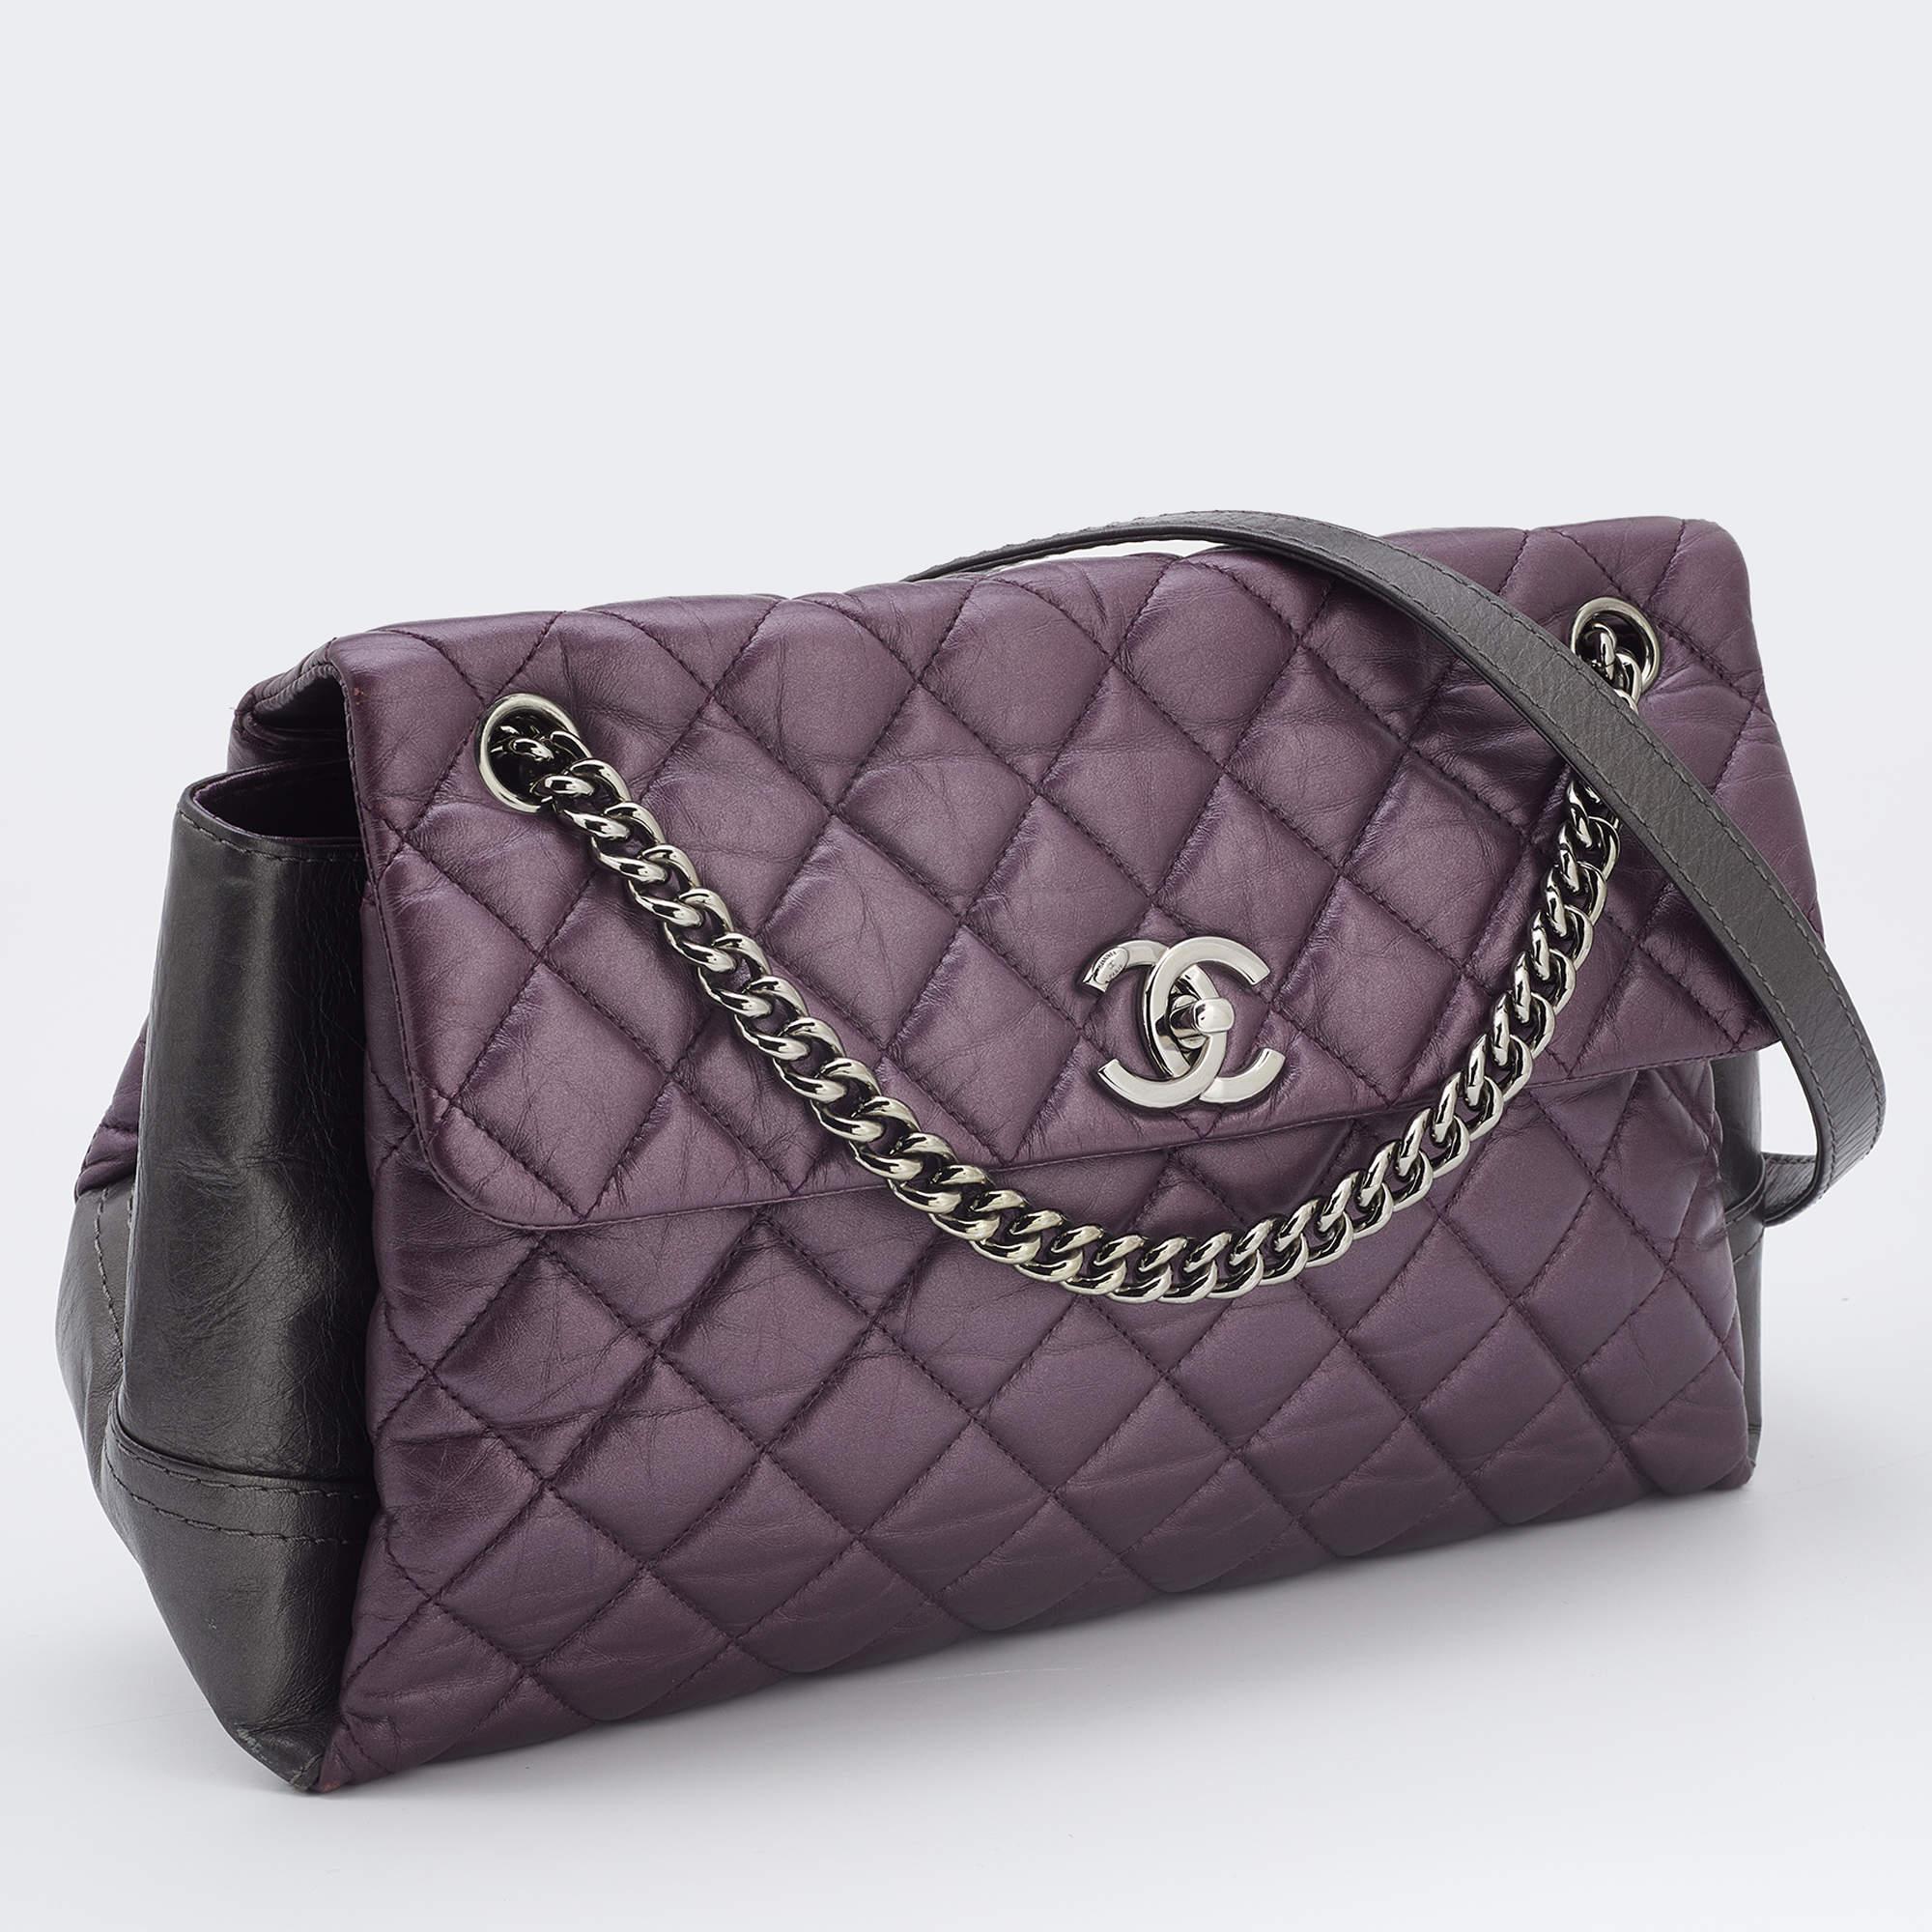 Women's Chanel Purple/Grey Quilted Leather Lady Pearly Flap Shoulder Bag